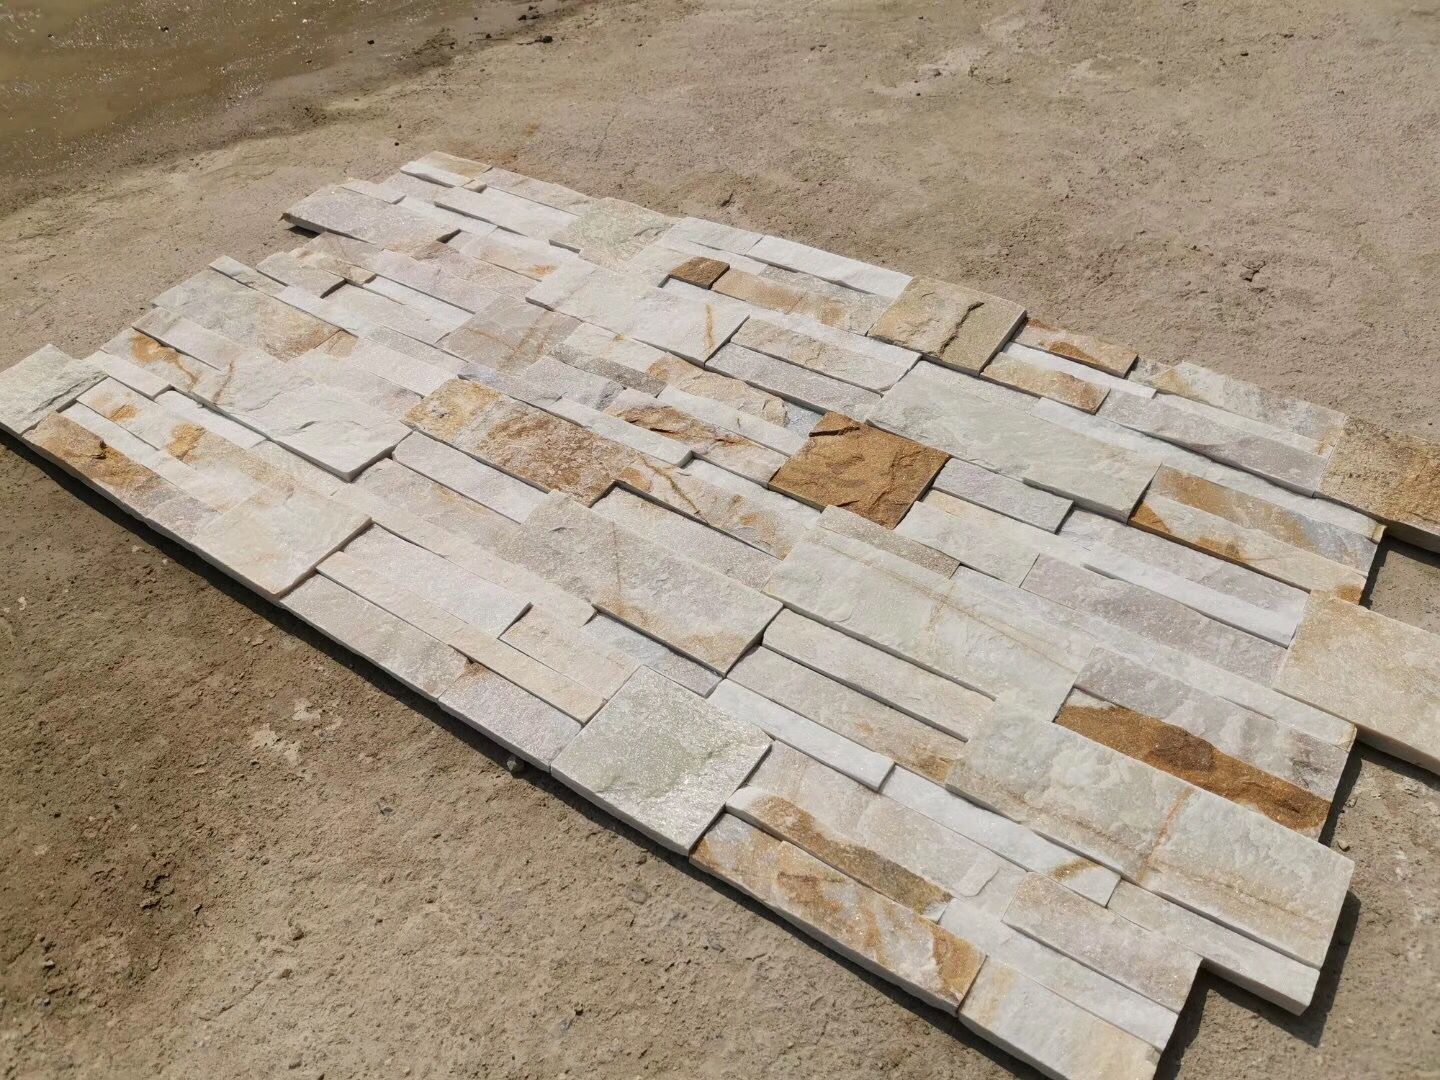 stackstone layout on the floor before installation to wlal